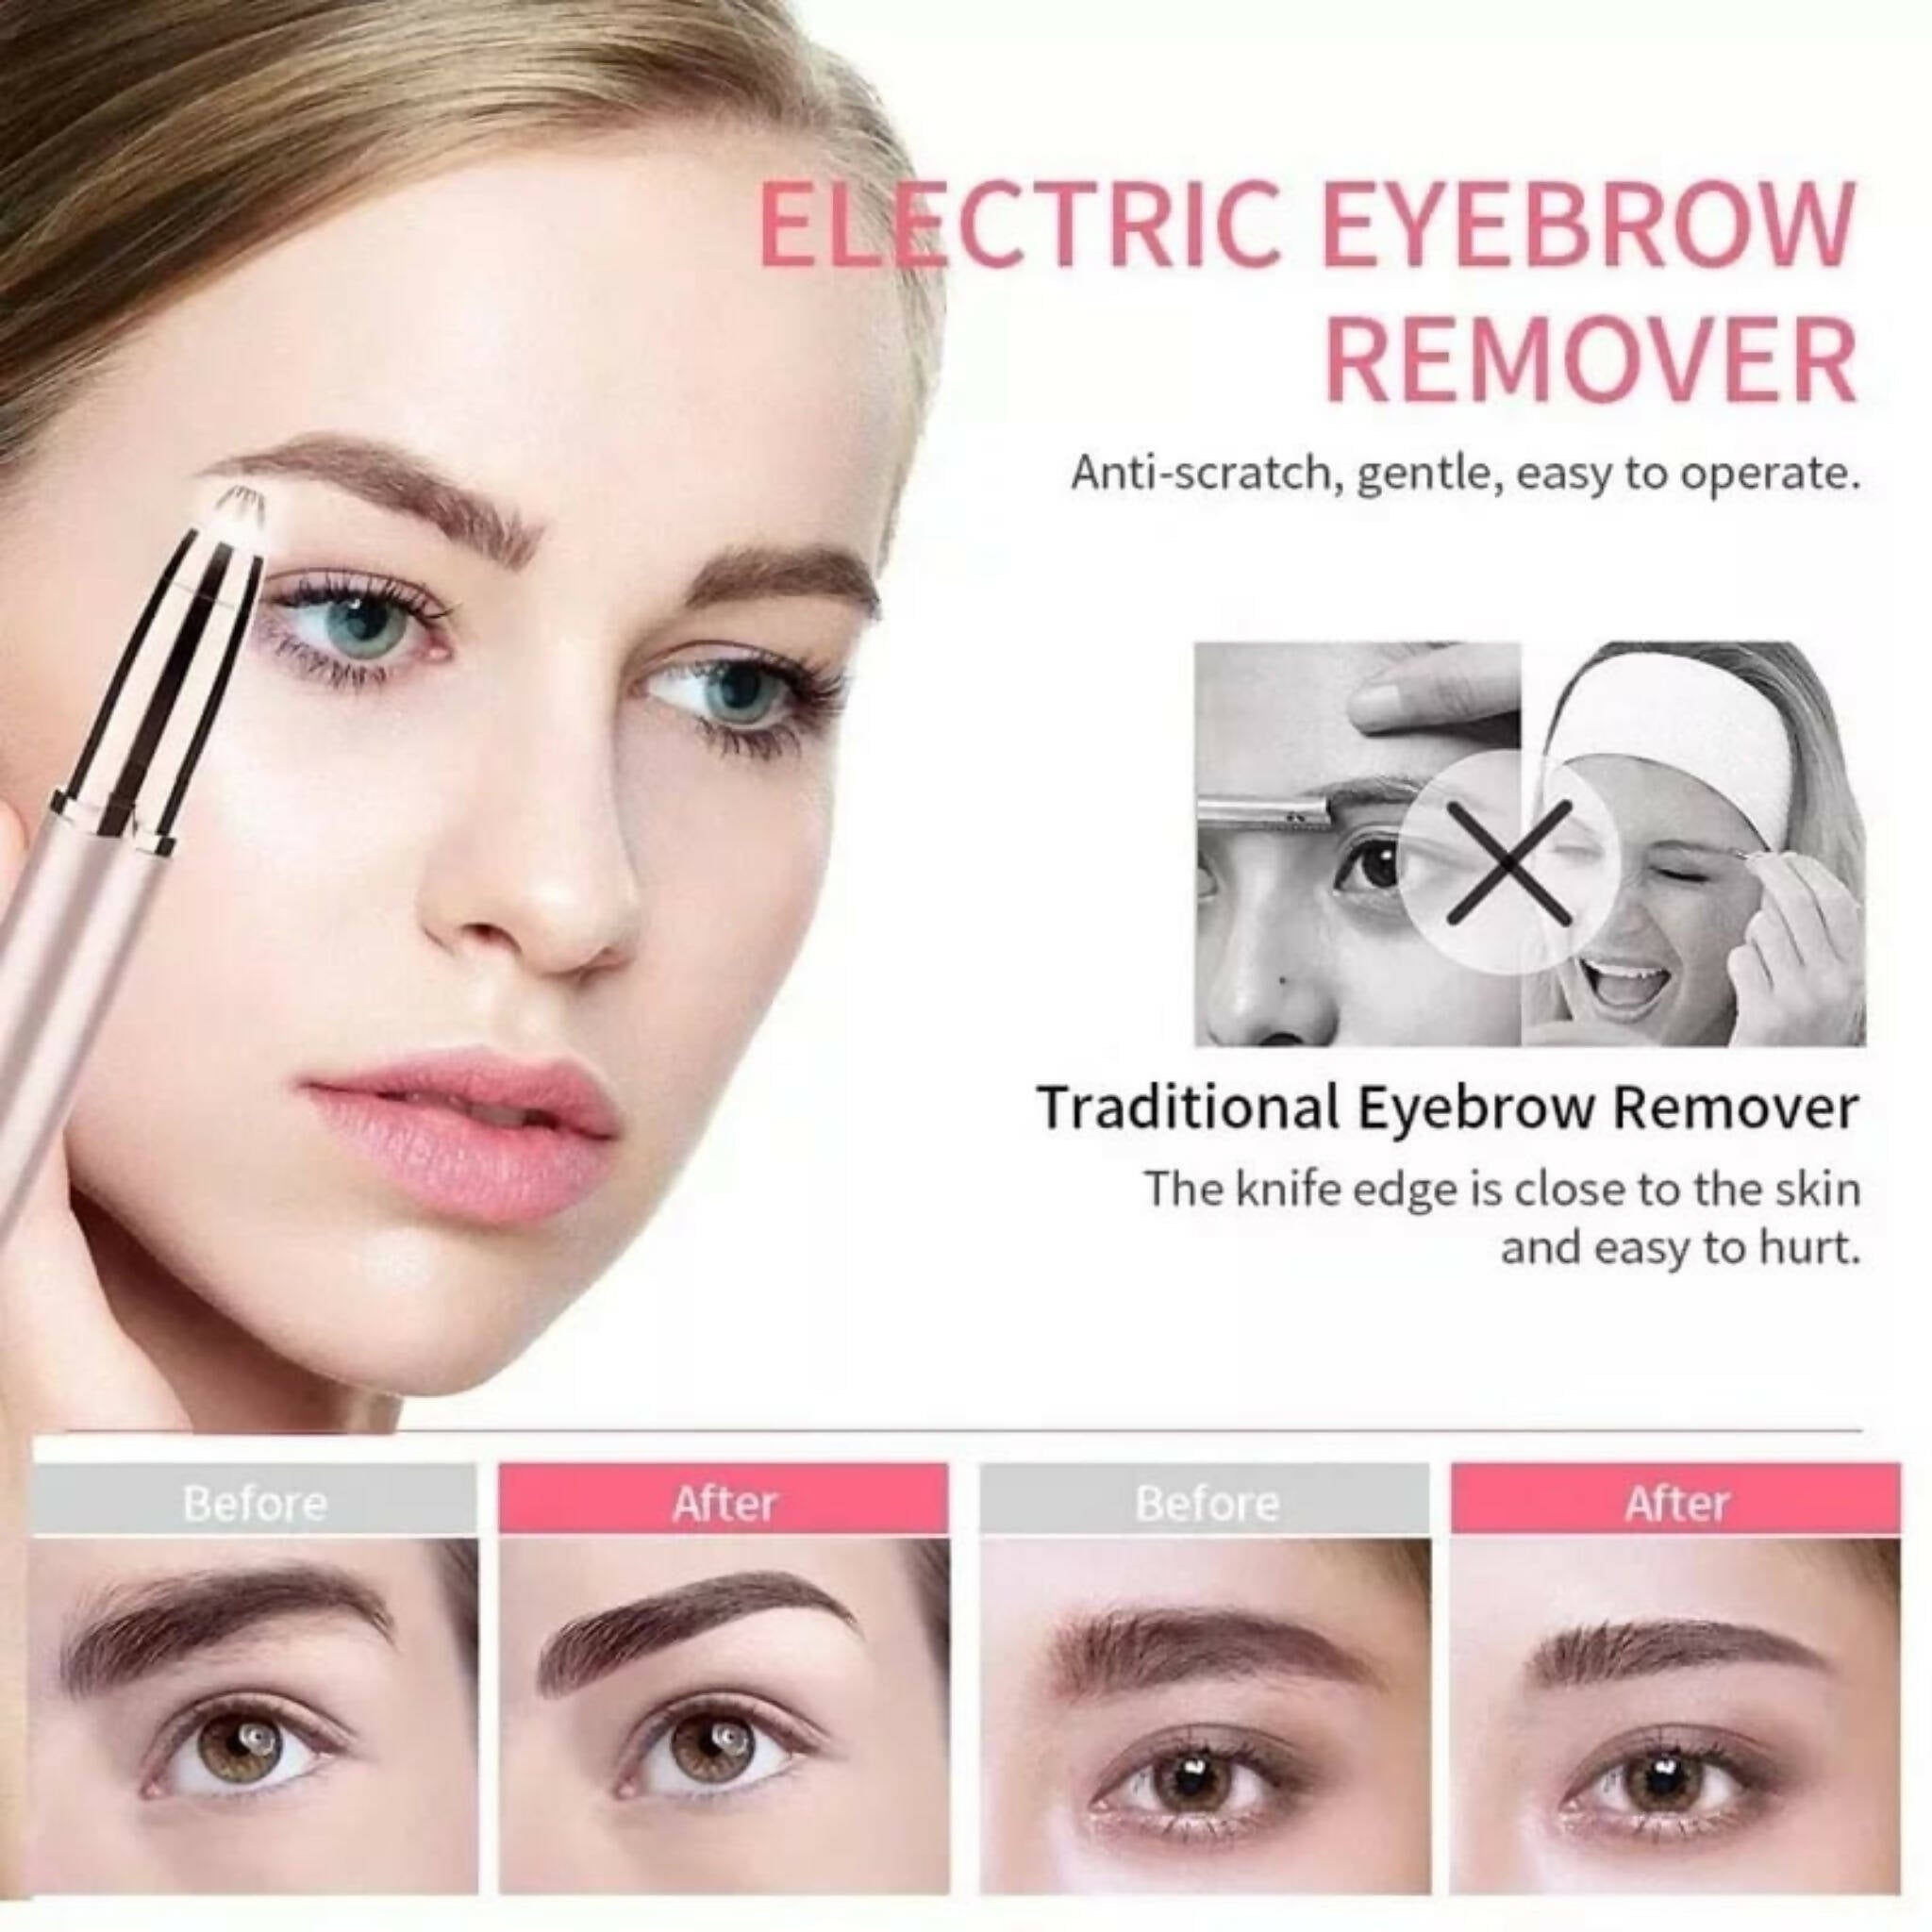 Flawless Brows and Facial Hair Removal, Painless & Effective Solutions